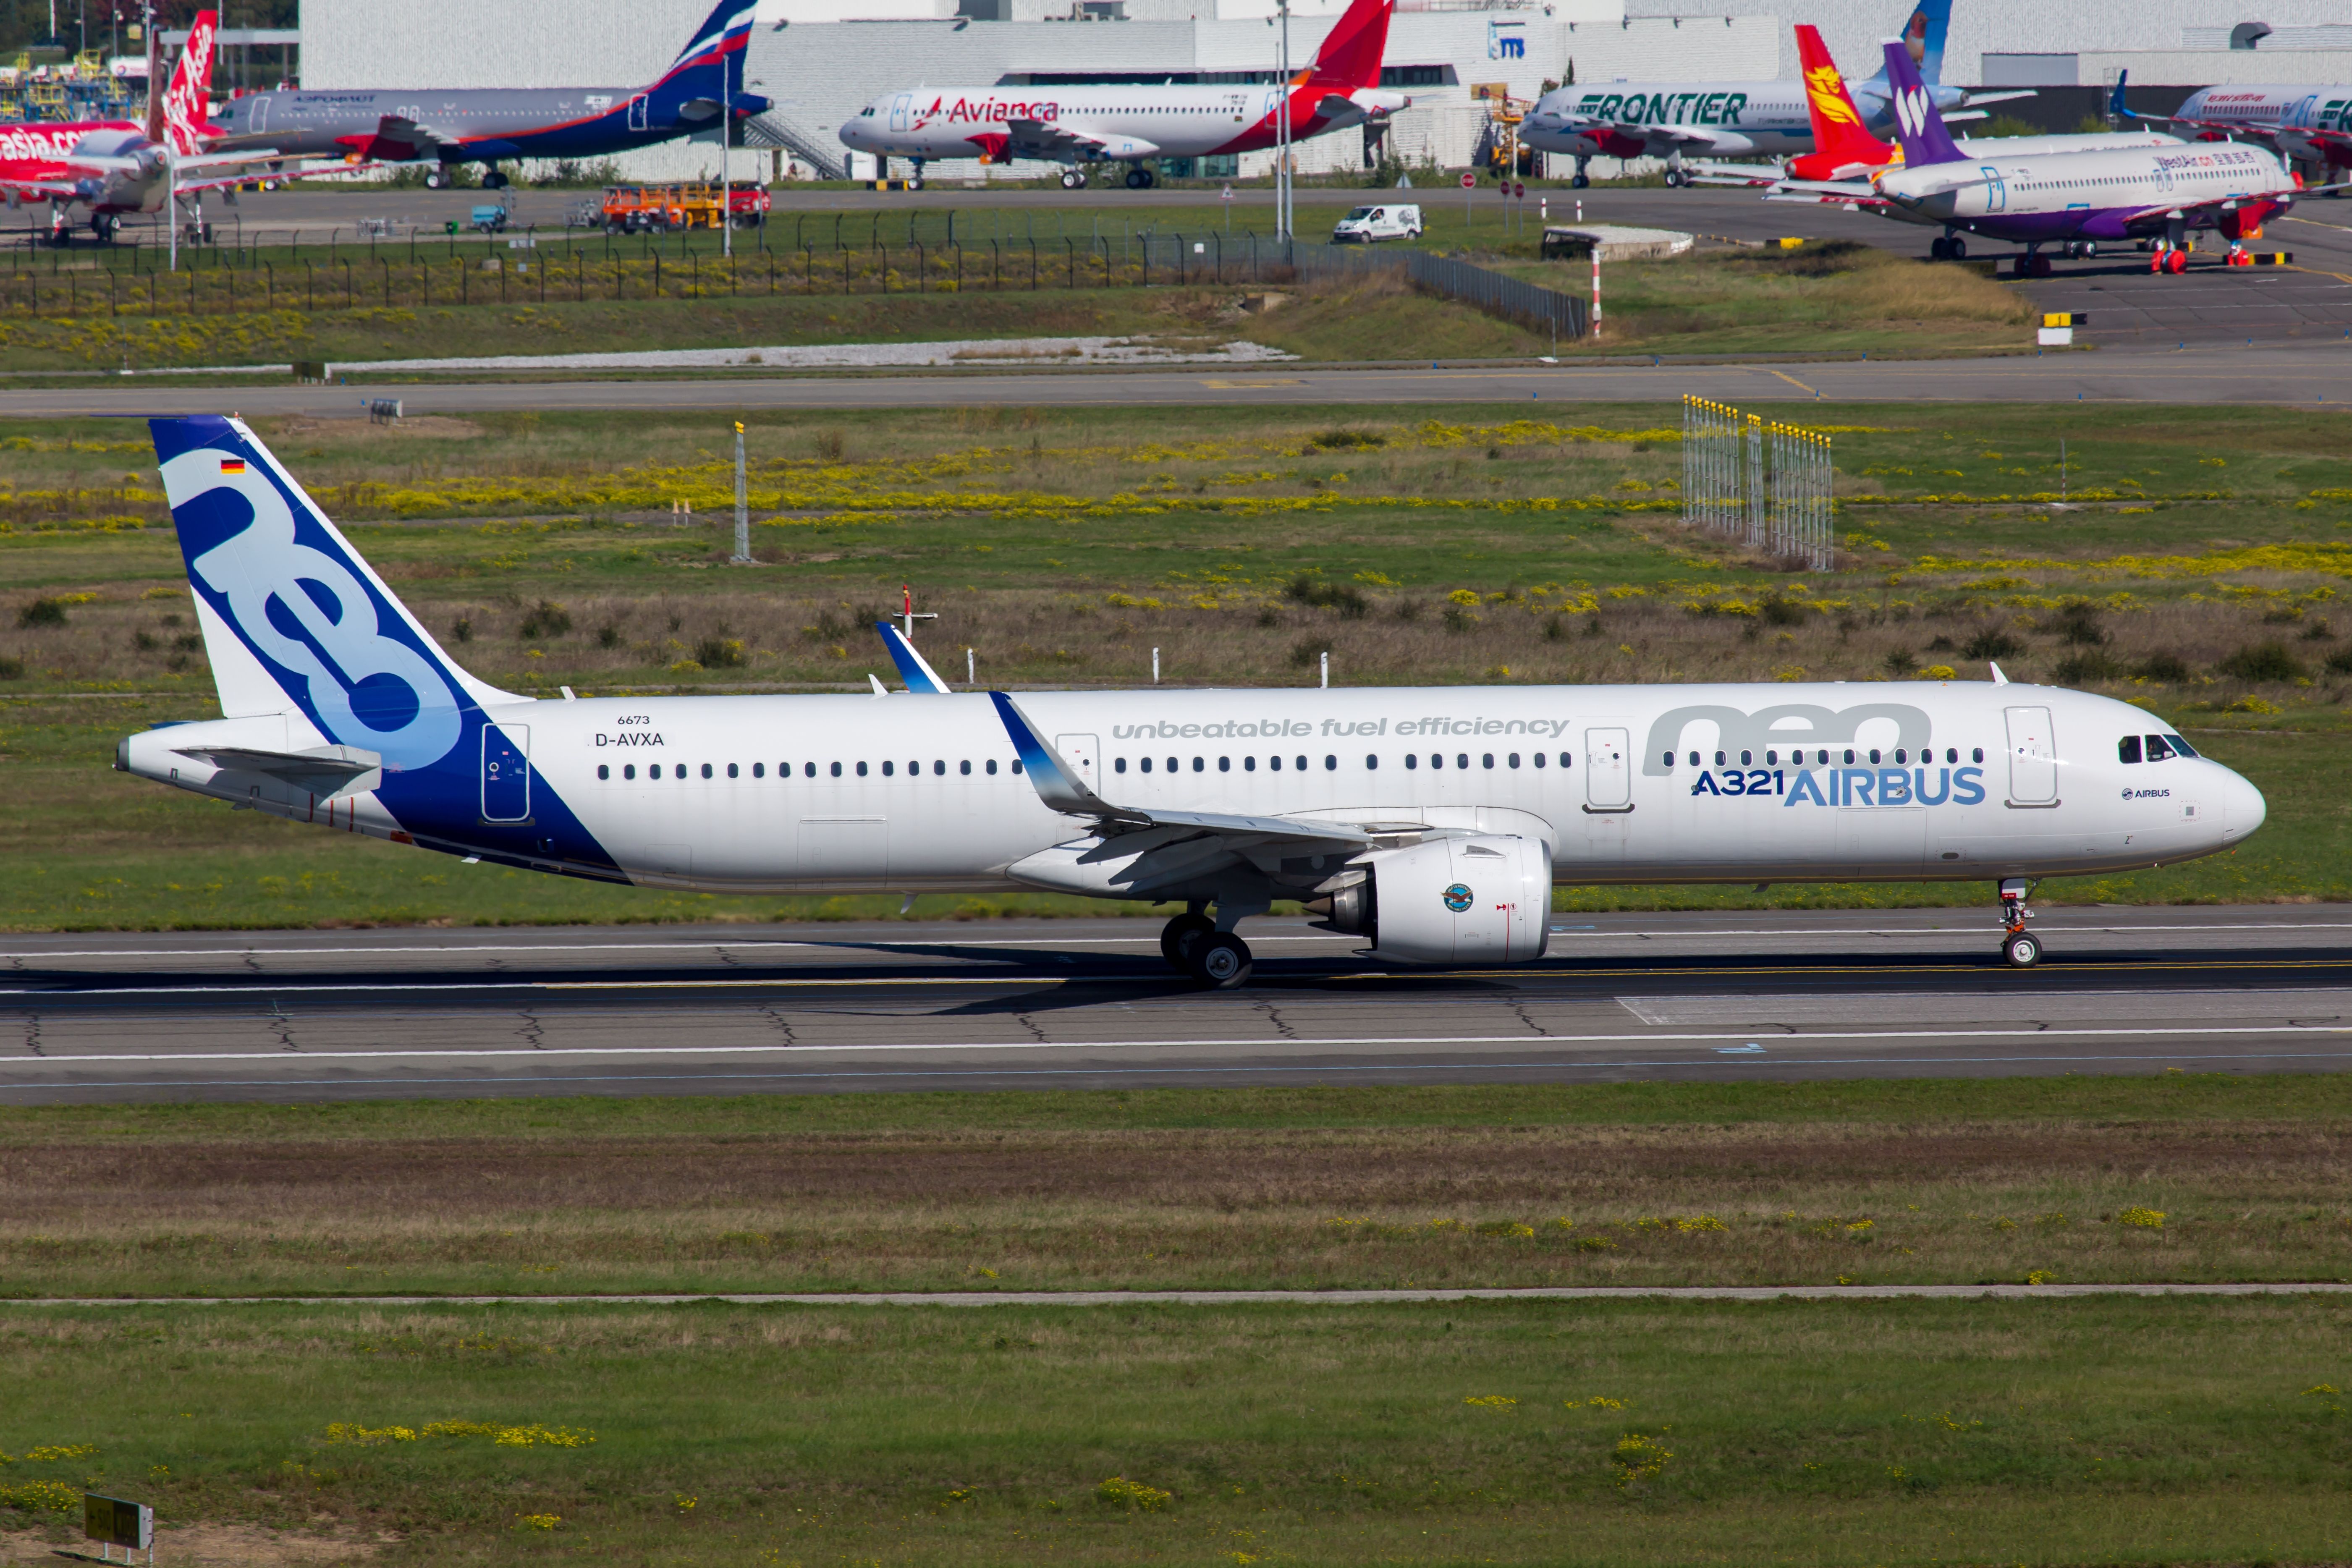 Airbus A321neo on the runway